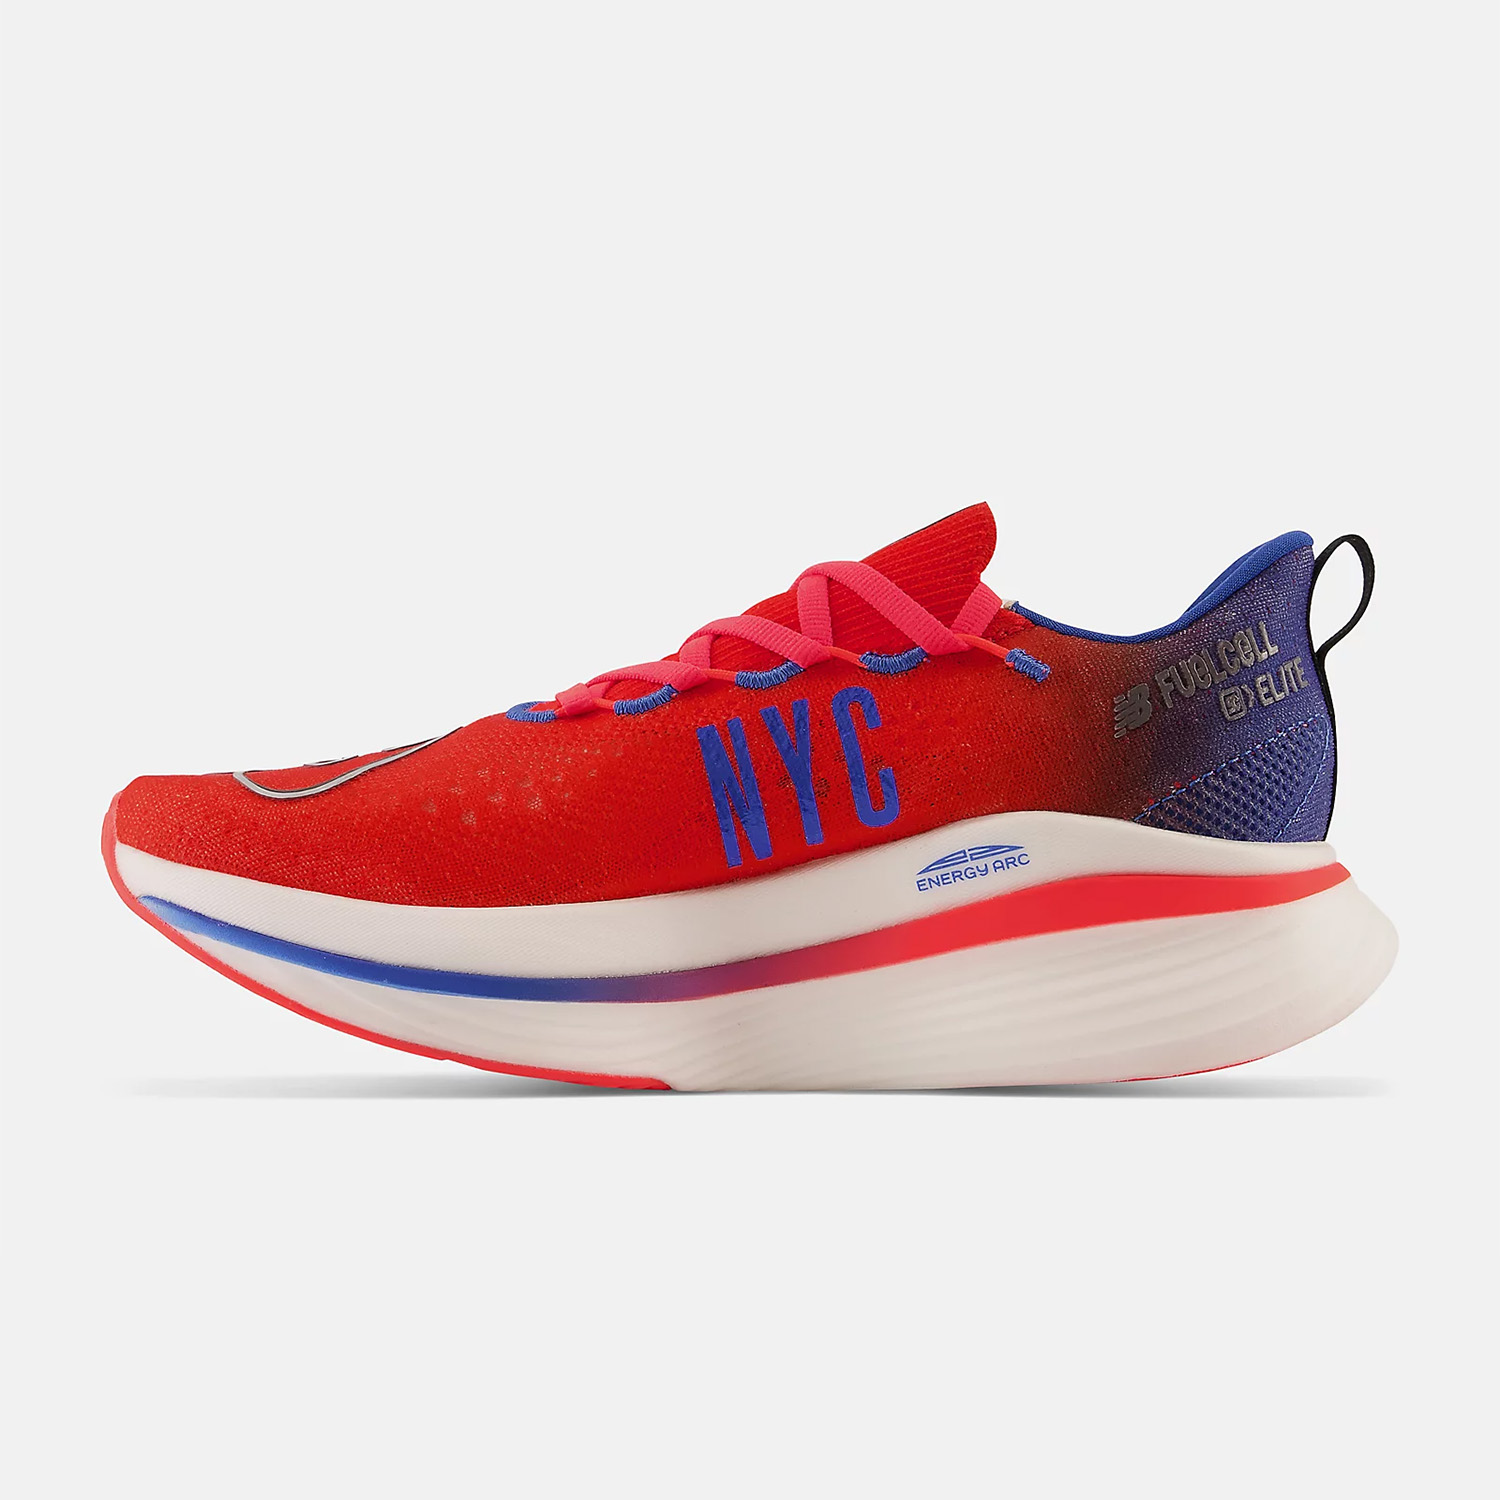 New Balance FuelCell SC Elite v3 NYCM - Electronic Red/Cobalt